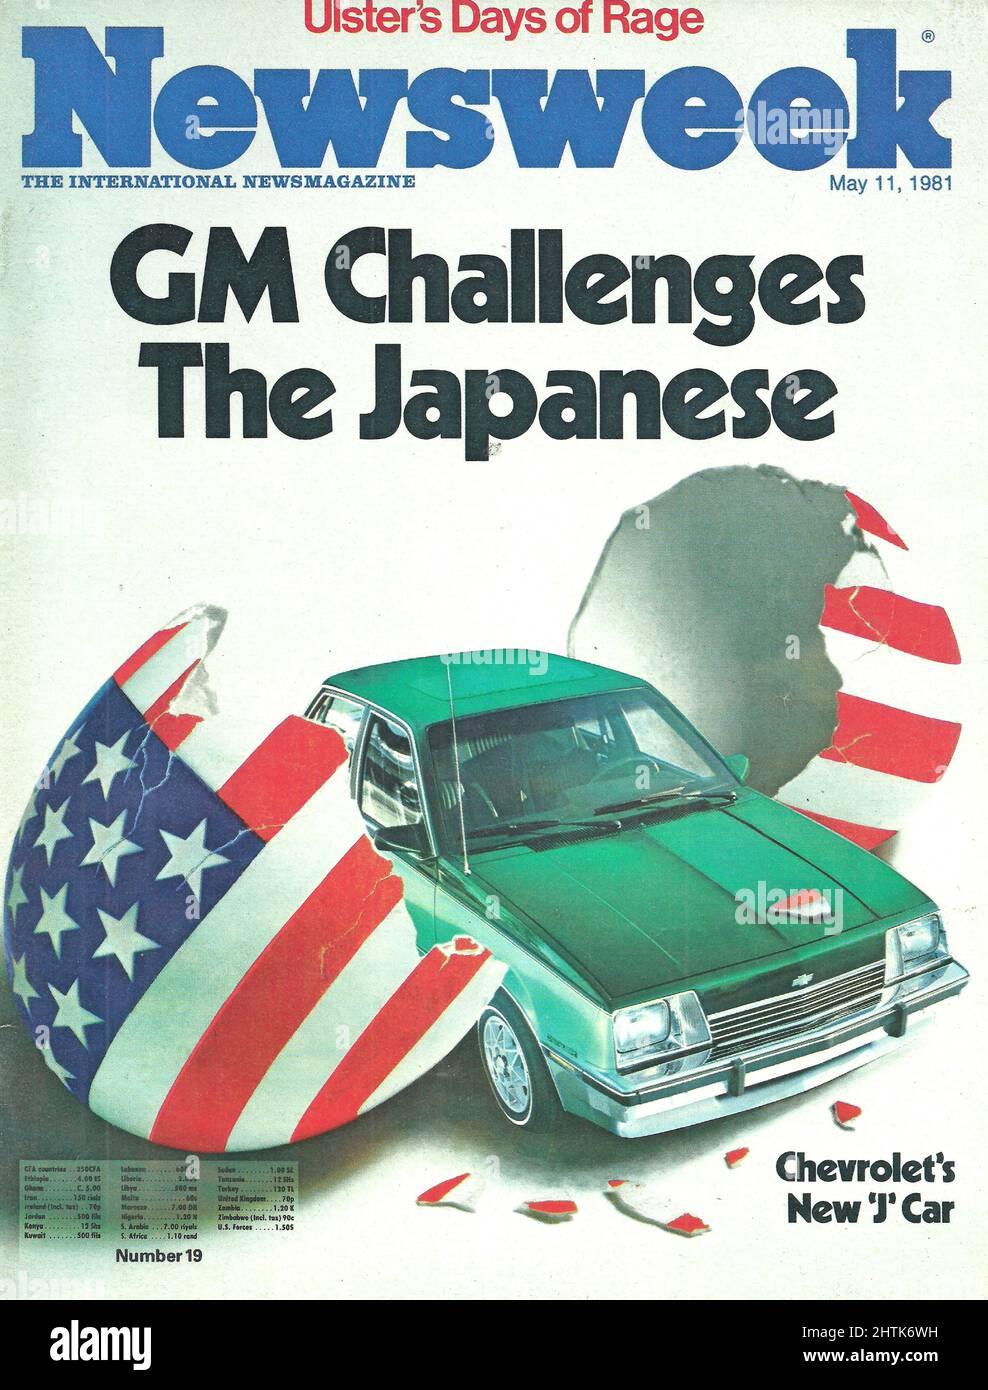 Newsweek cover May 11 1981 GM challenges the Japanese Chevrolet's New J car Ulster's day of rage Stock Photo